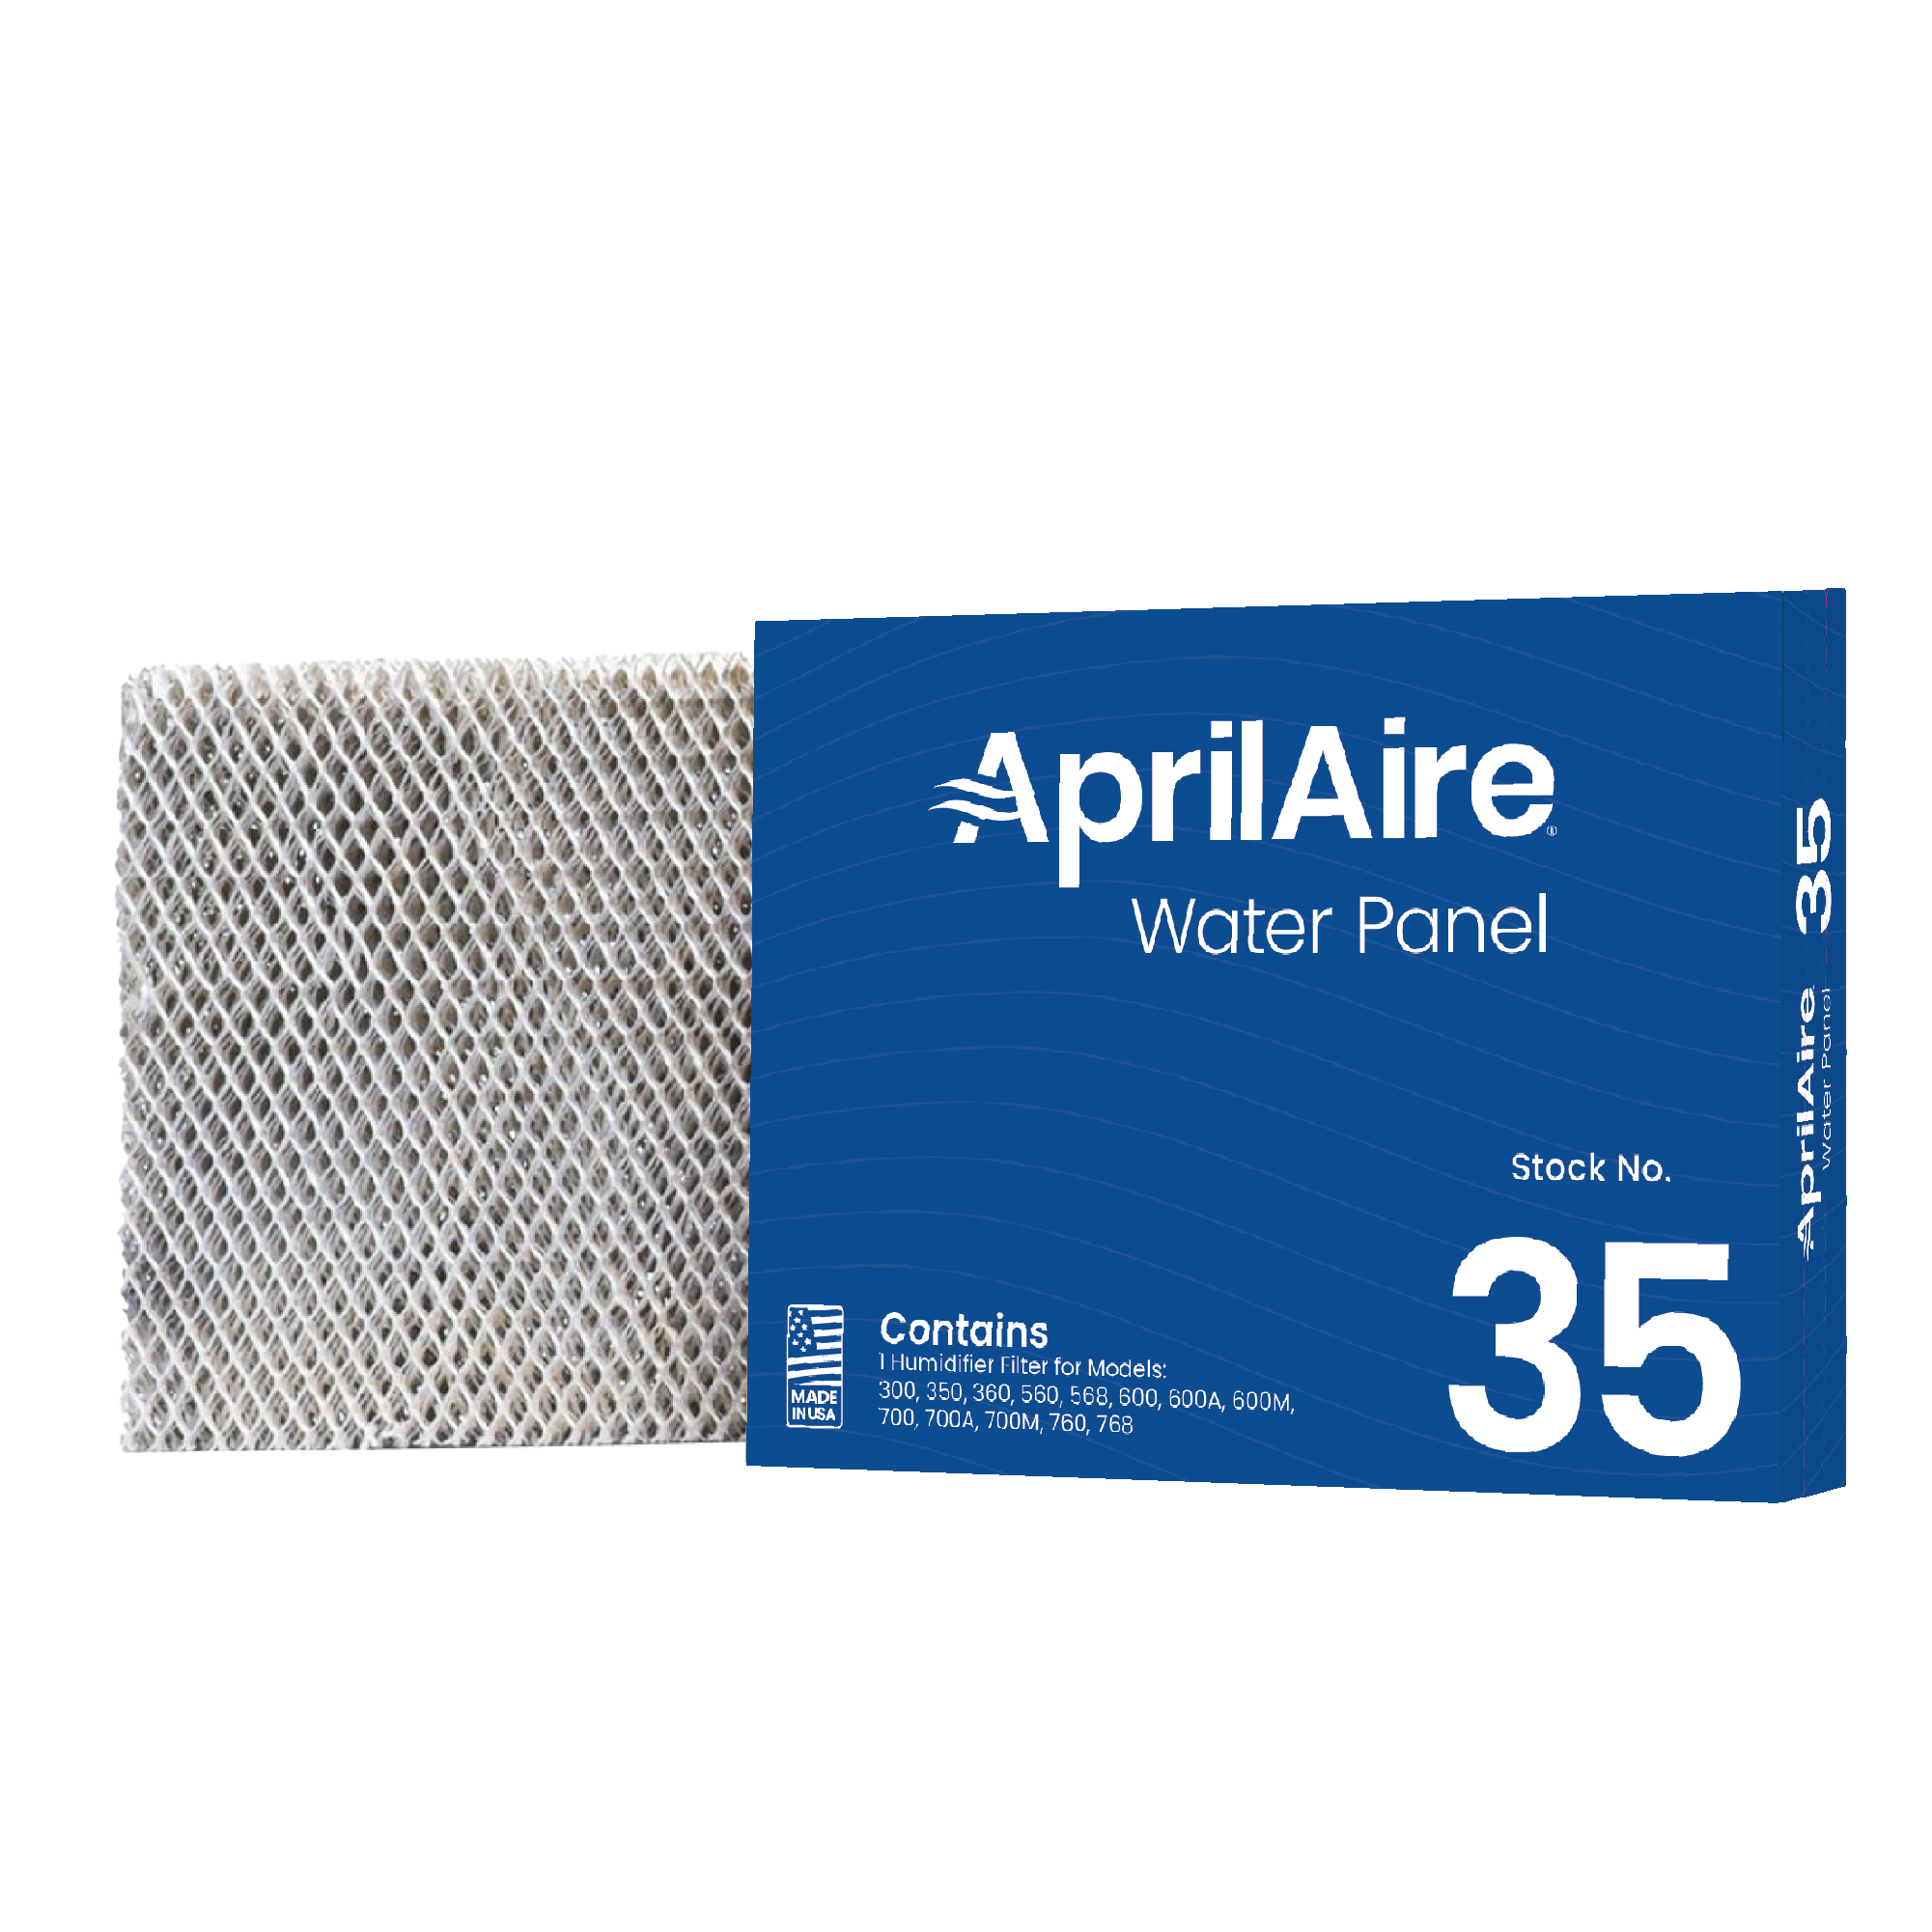 AprilAire Water Panel 35 Humidifier Filter Fits Whole-House Humidifier Models 300, 350, 360, 560, 568, 600, 600A, 600M, 700, 700A, 700M, 760 and 768